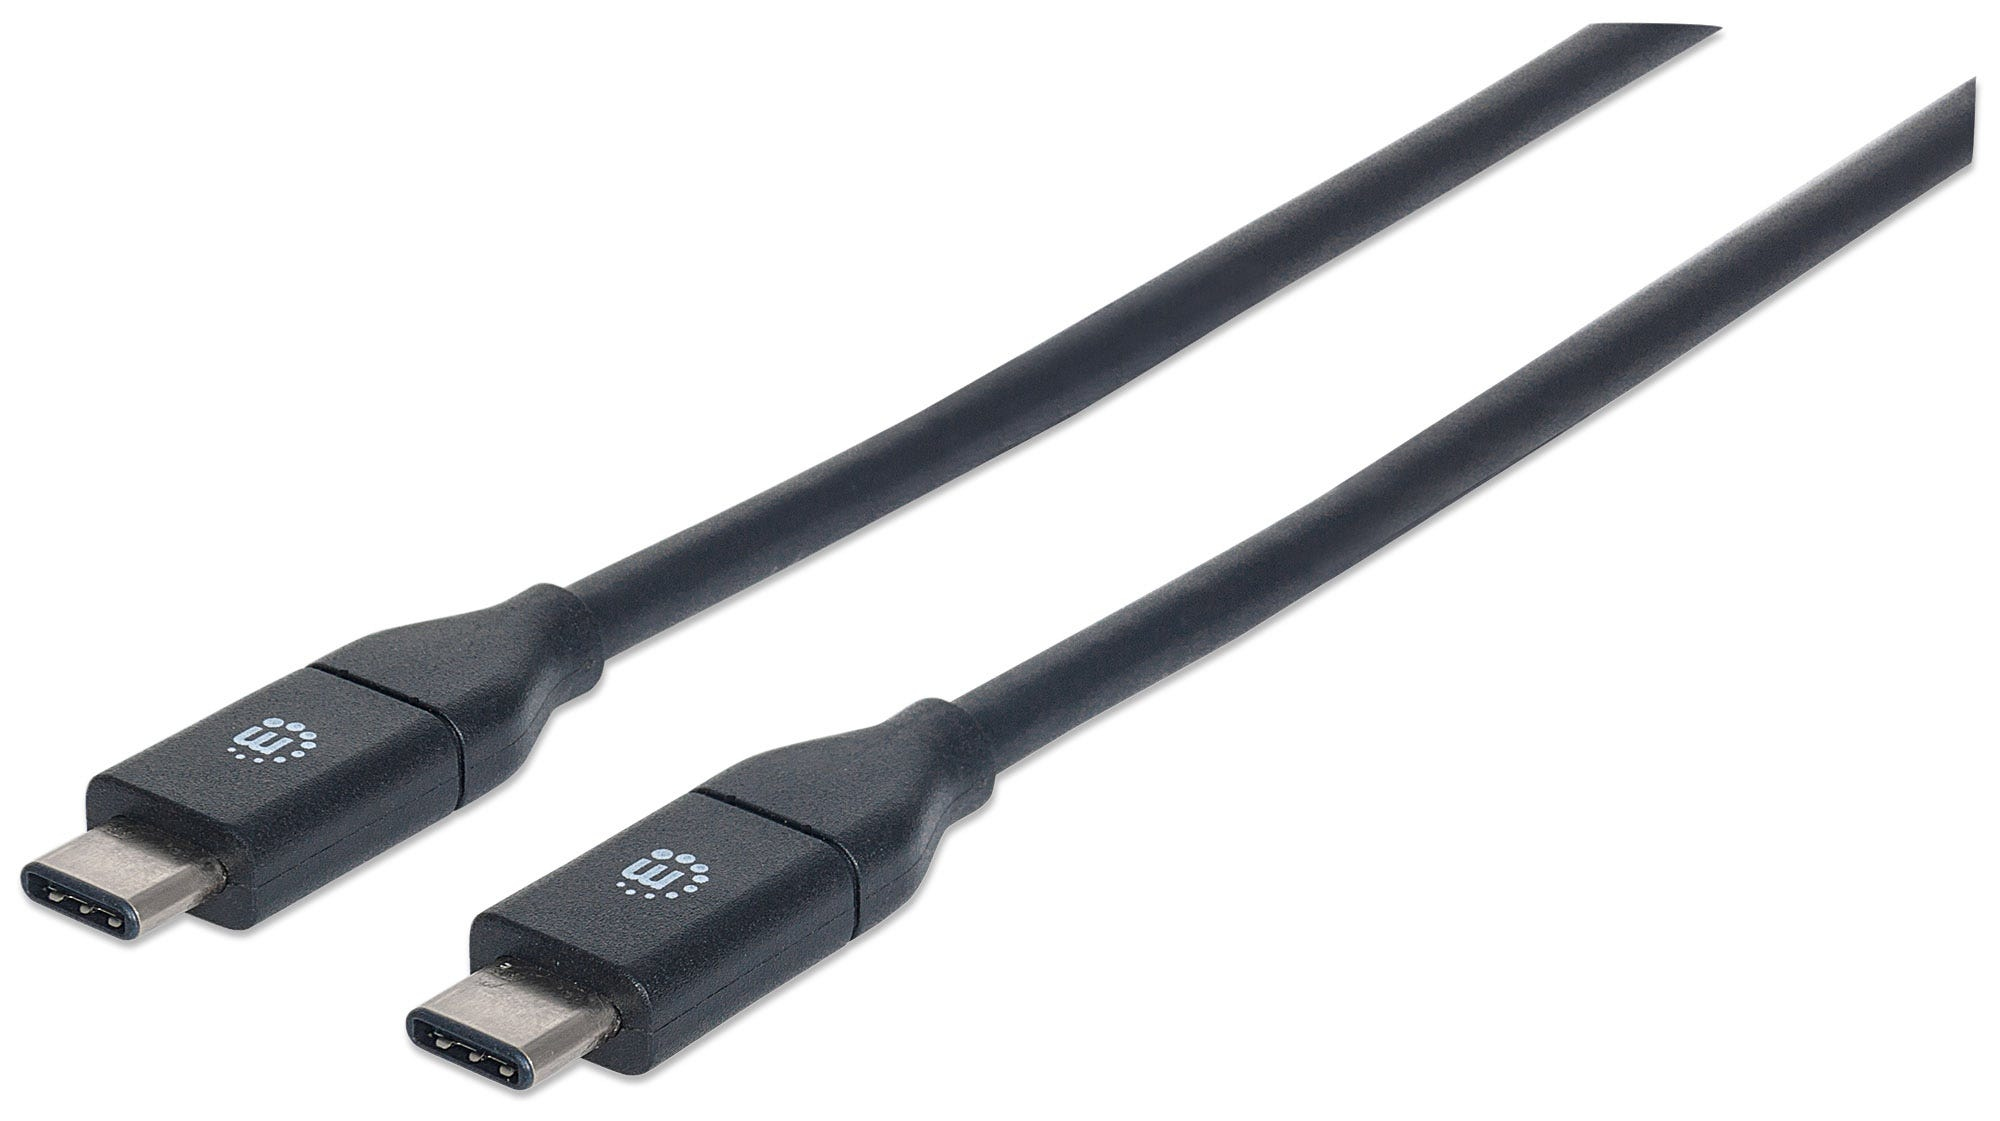 Photos - Cable (video, audio, USB) MANHATTAN USB-C to USB-C Cable, 1m, Male to Male, Black, 10 Gbps (USB 3535 